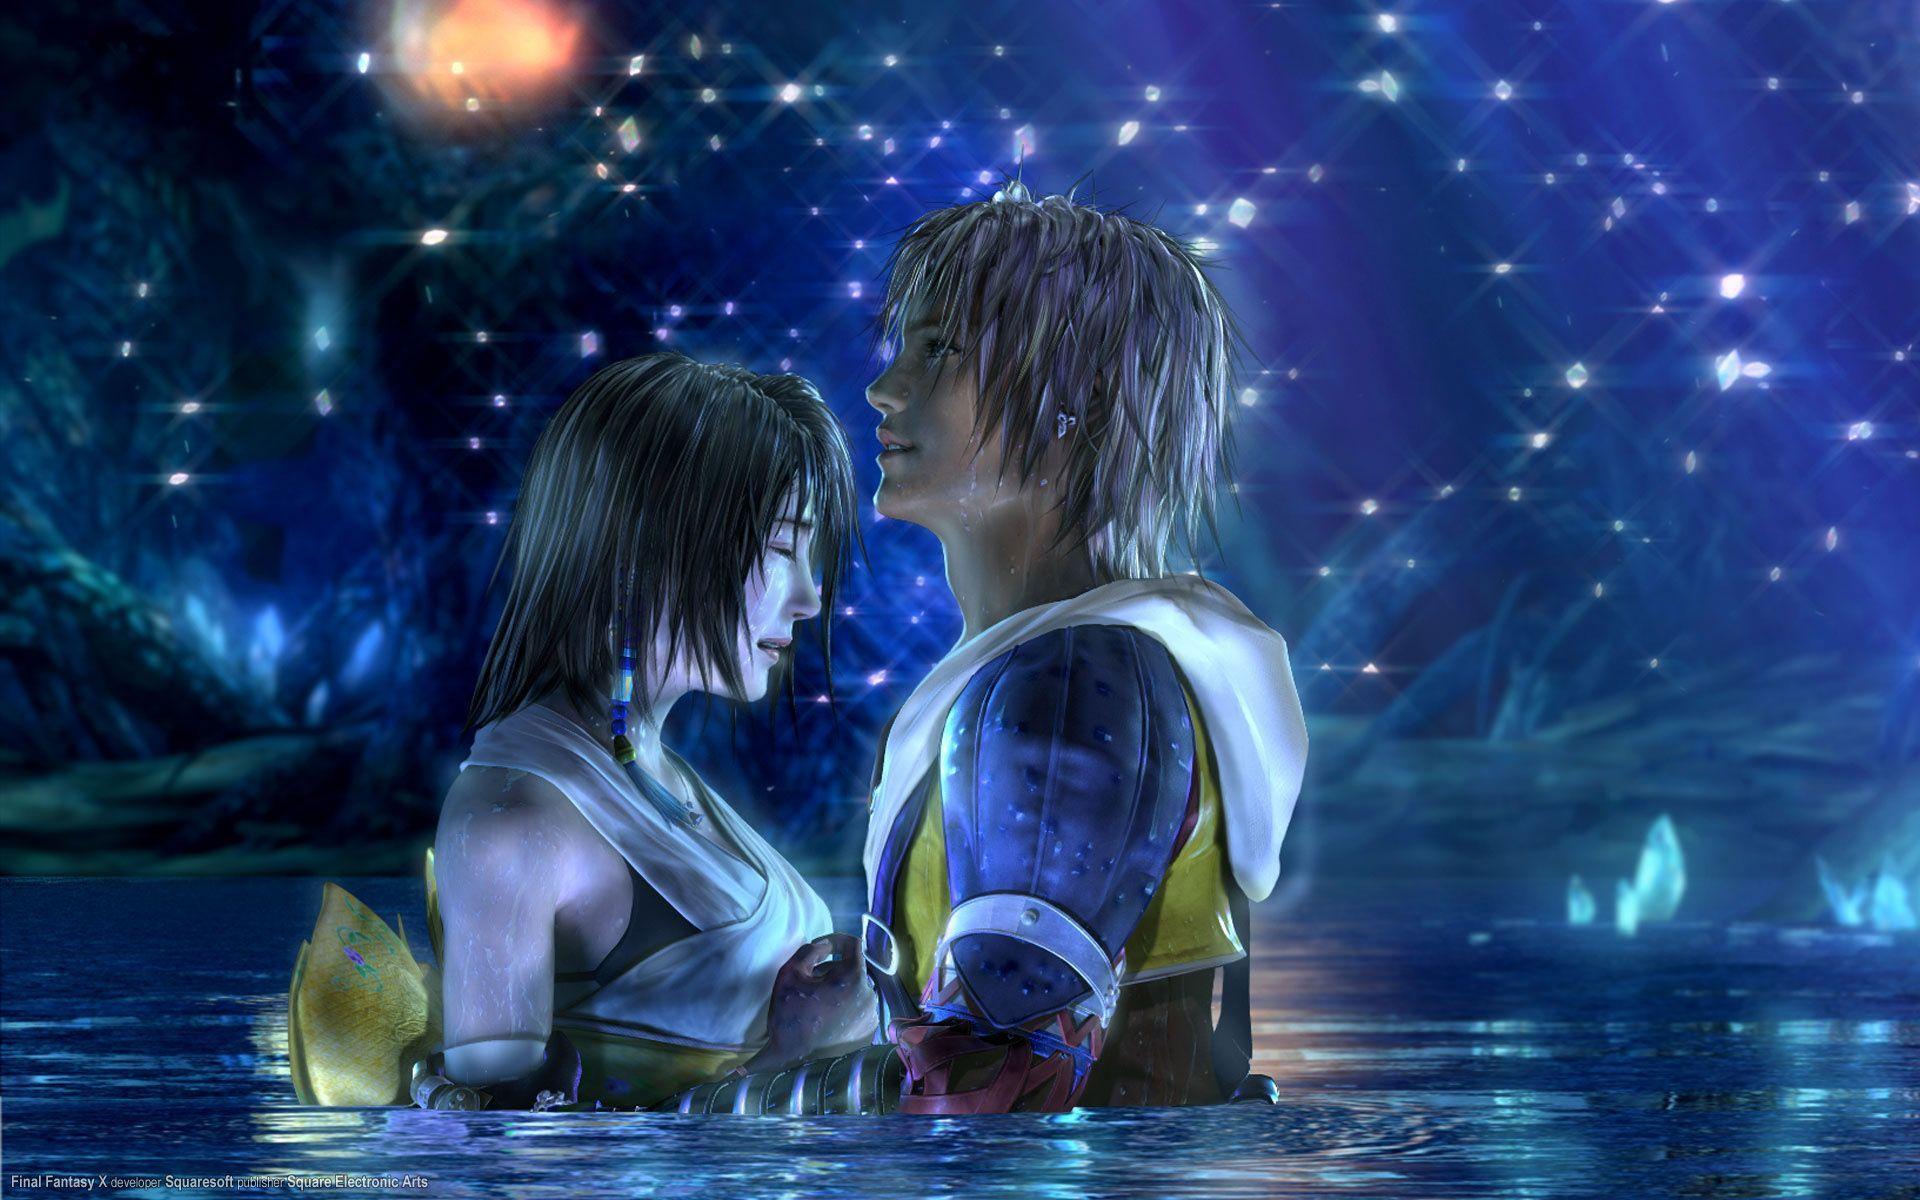 Final Fantasy X and Yuna. One of the most memorable endings